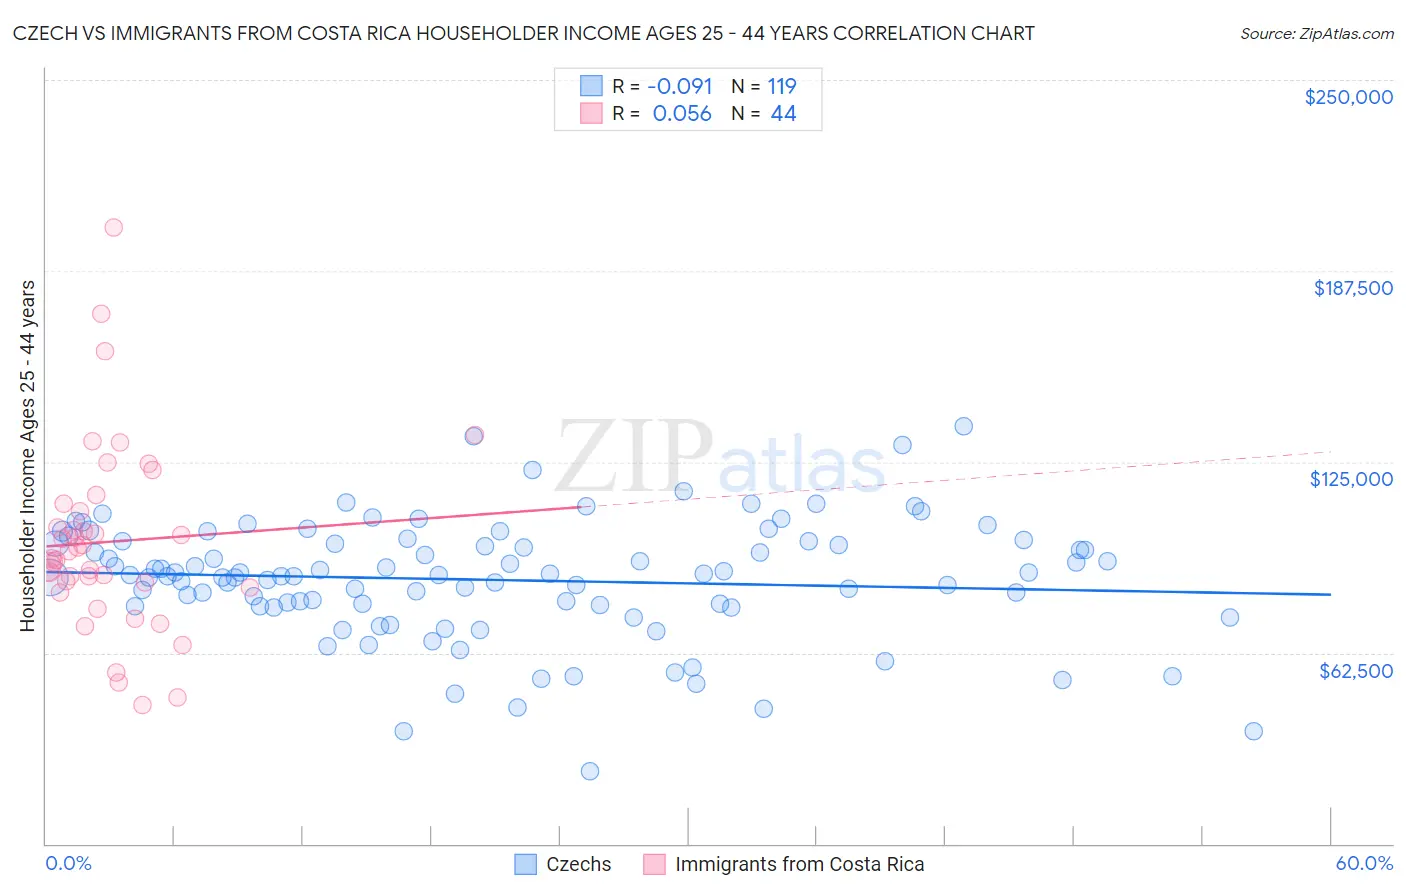 Czech vs Immigrants from Costa Rica Householder Income Ages 25 - 44 years